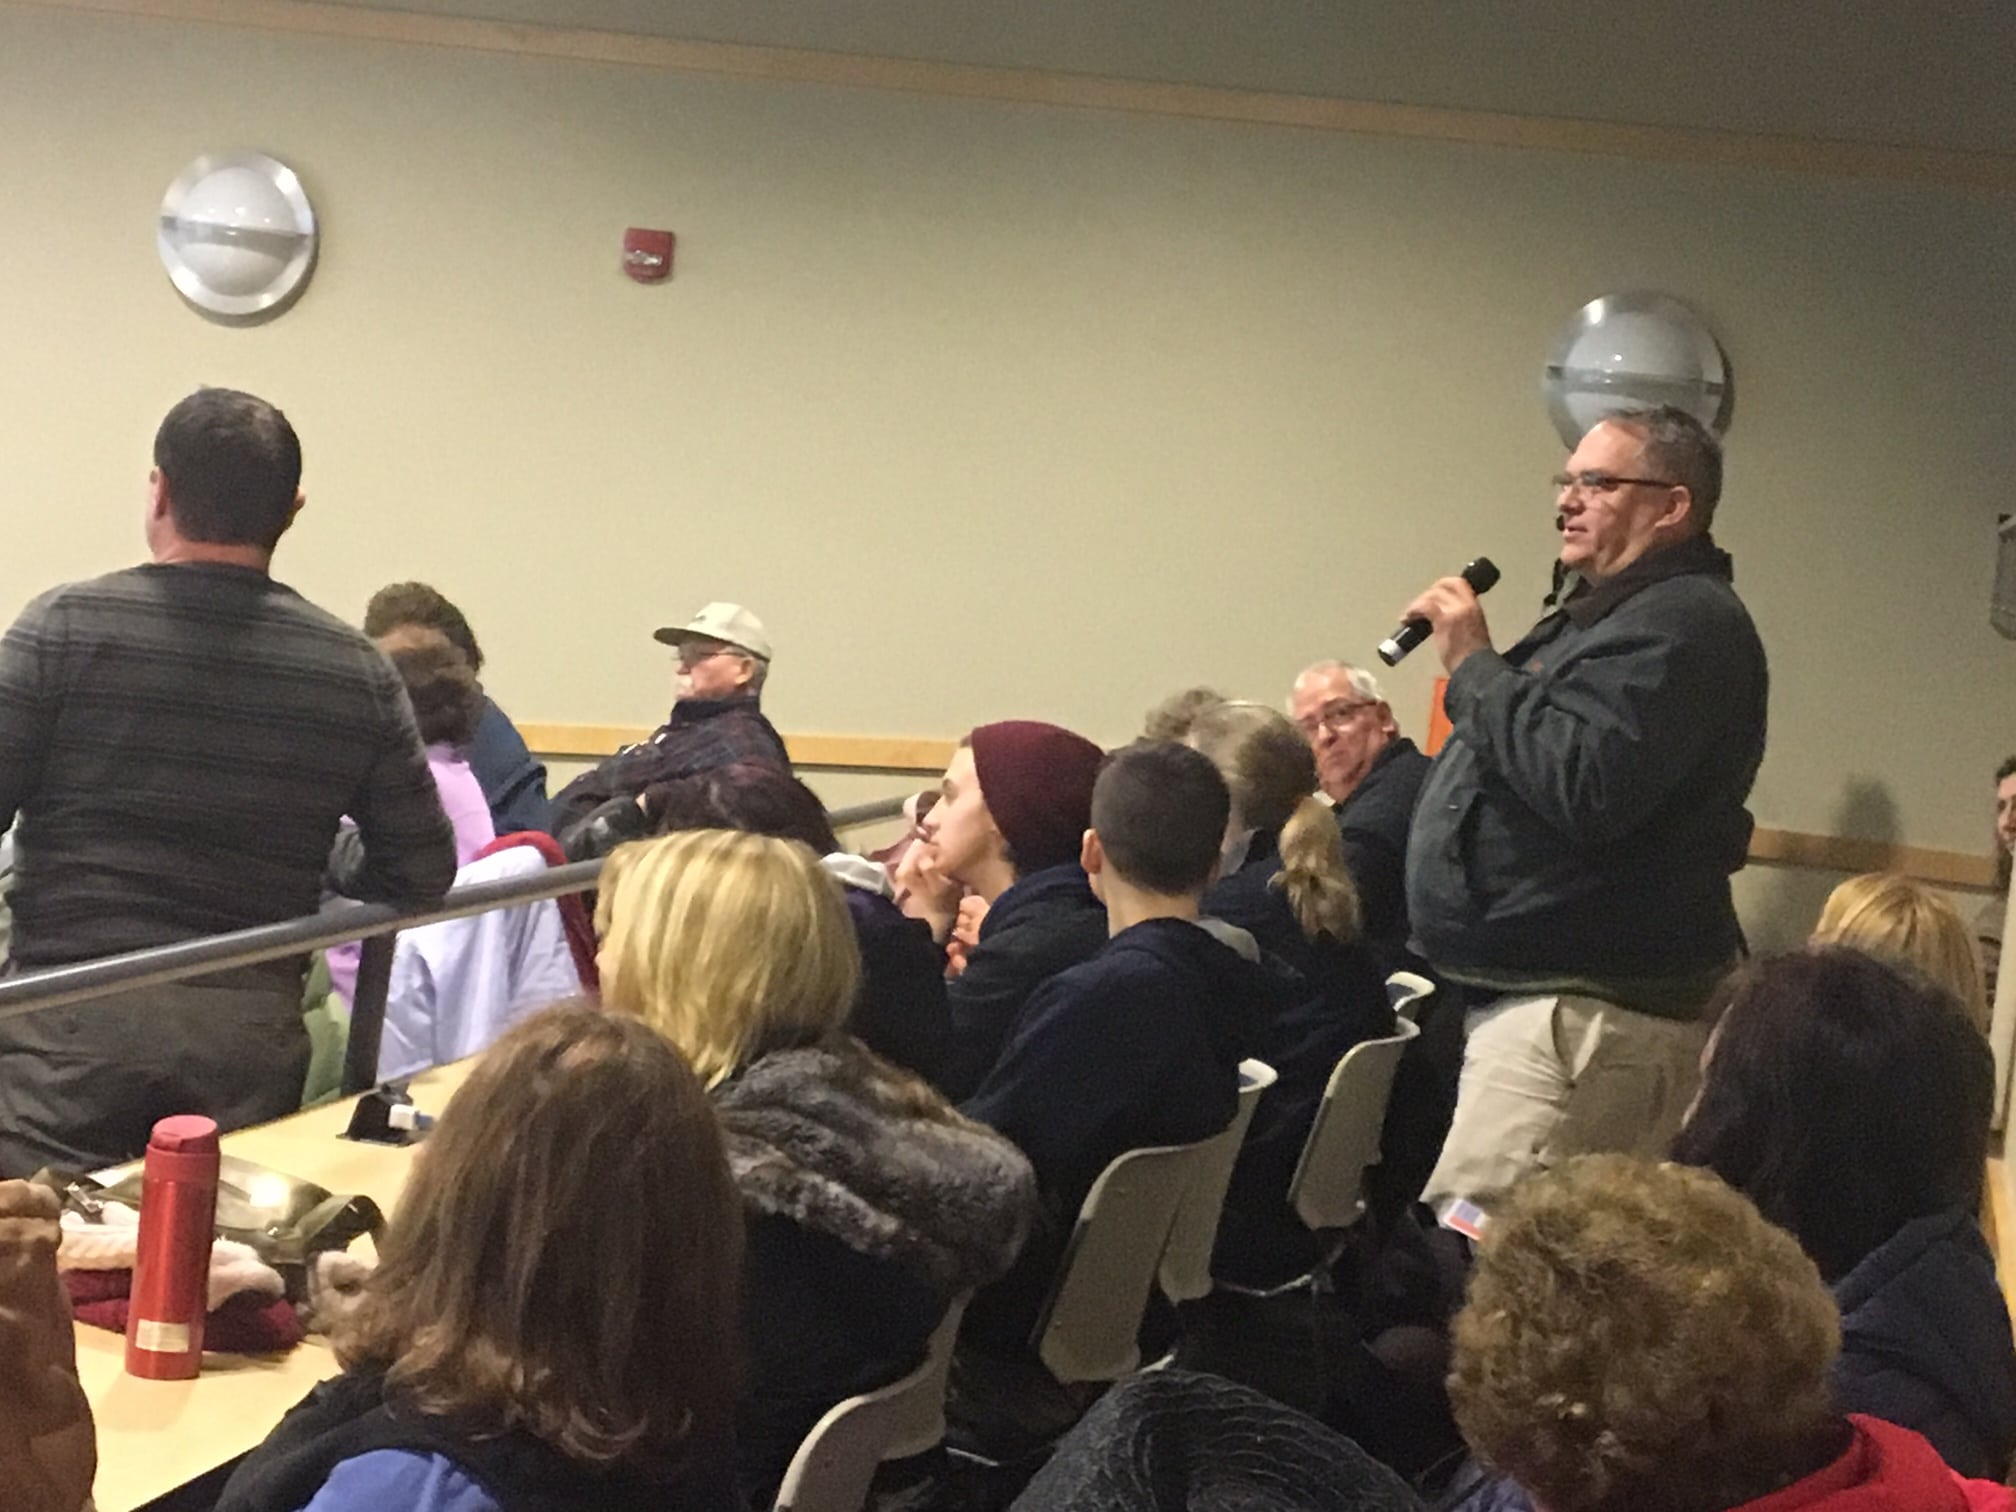 Man speaks wtih microphone at Heroin information session